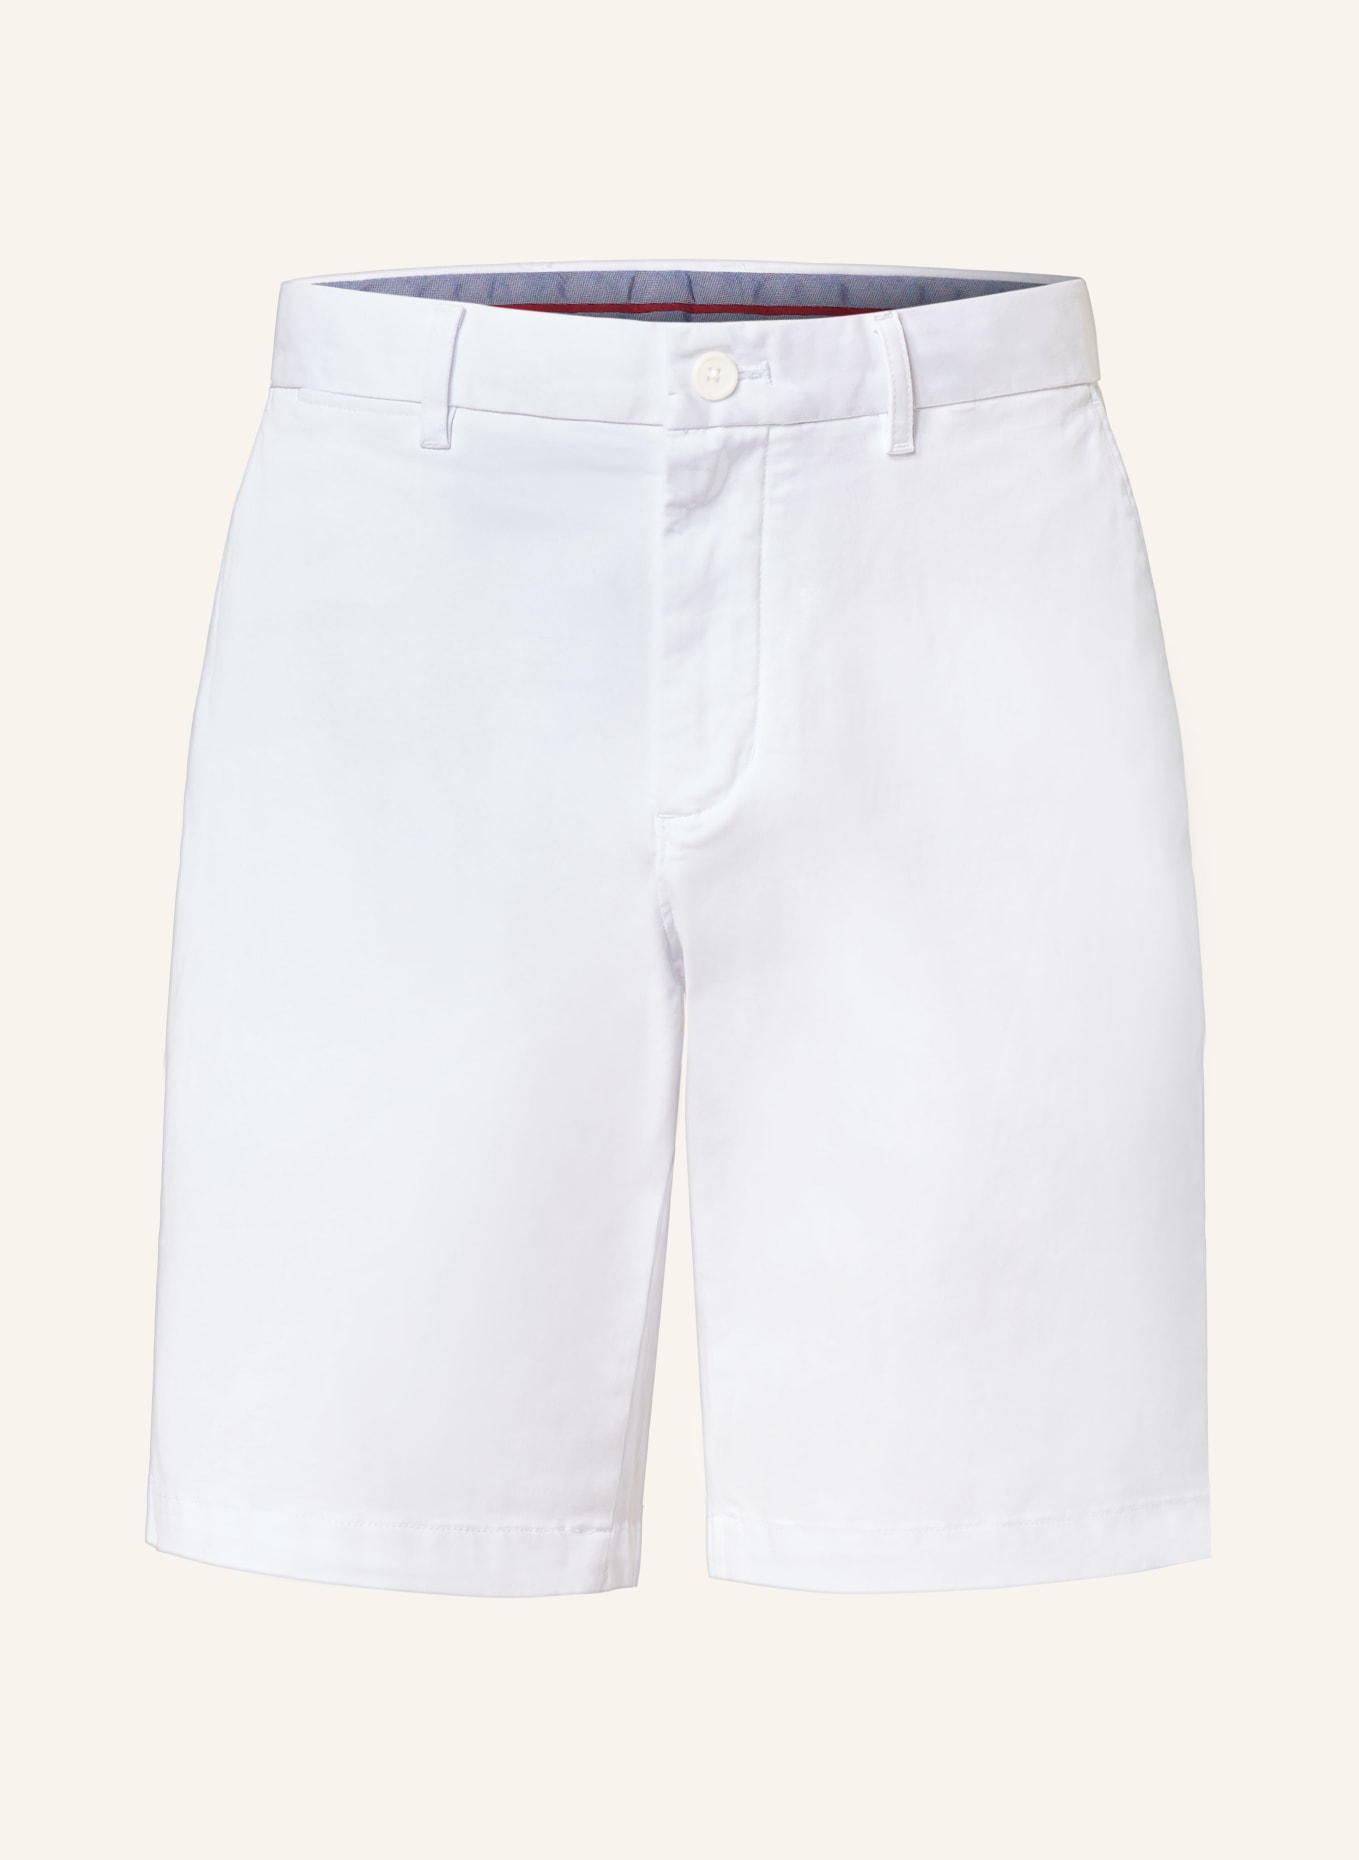 TOMMY HILFIGER Chinoshorts HARLEM Relaxed Tapered Fit, Farbe: WEISS (Bild 1)